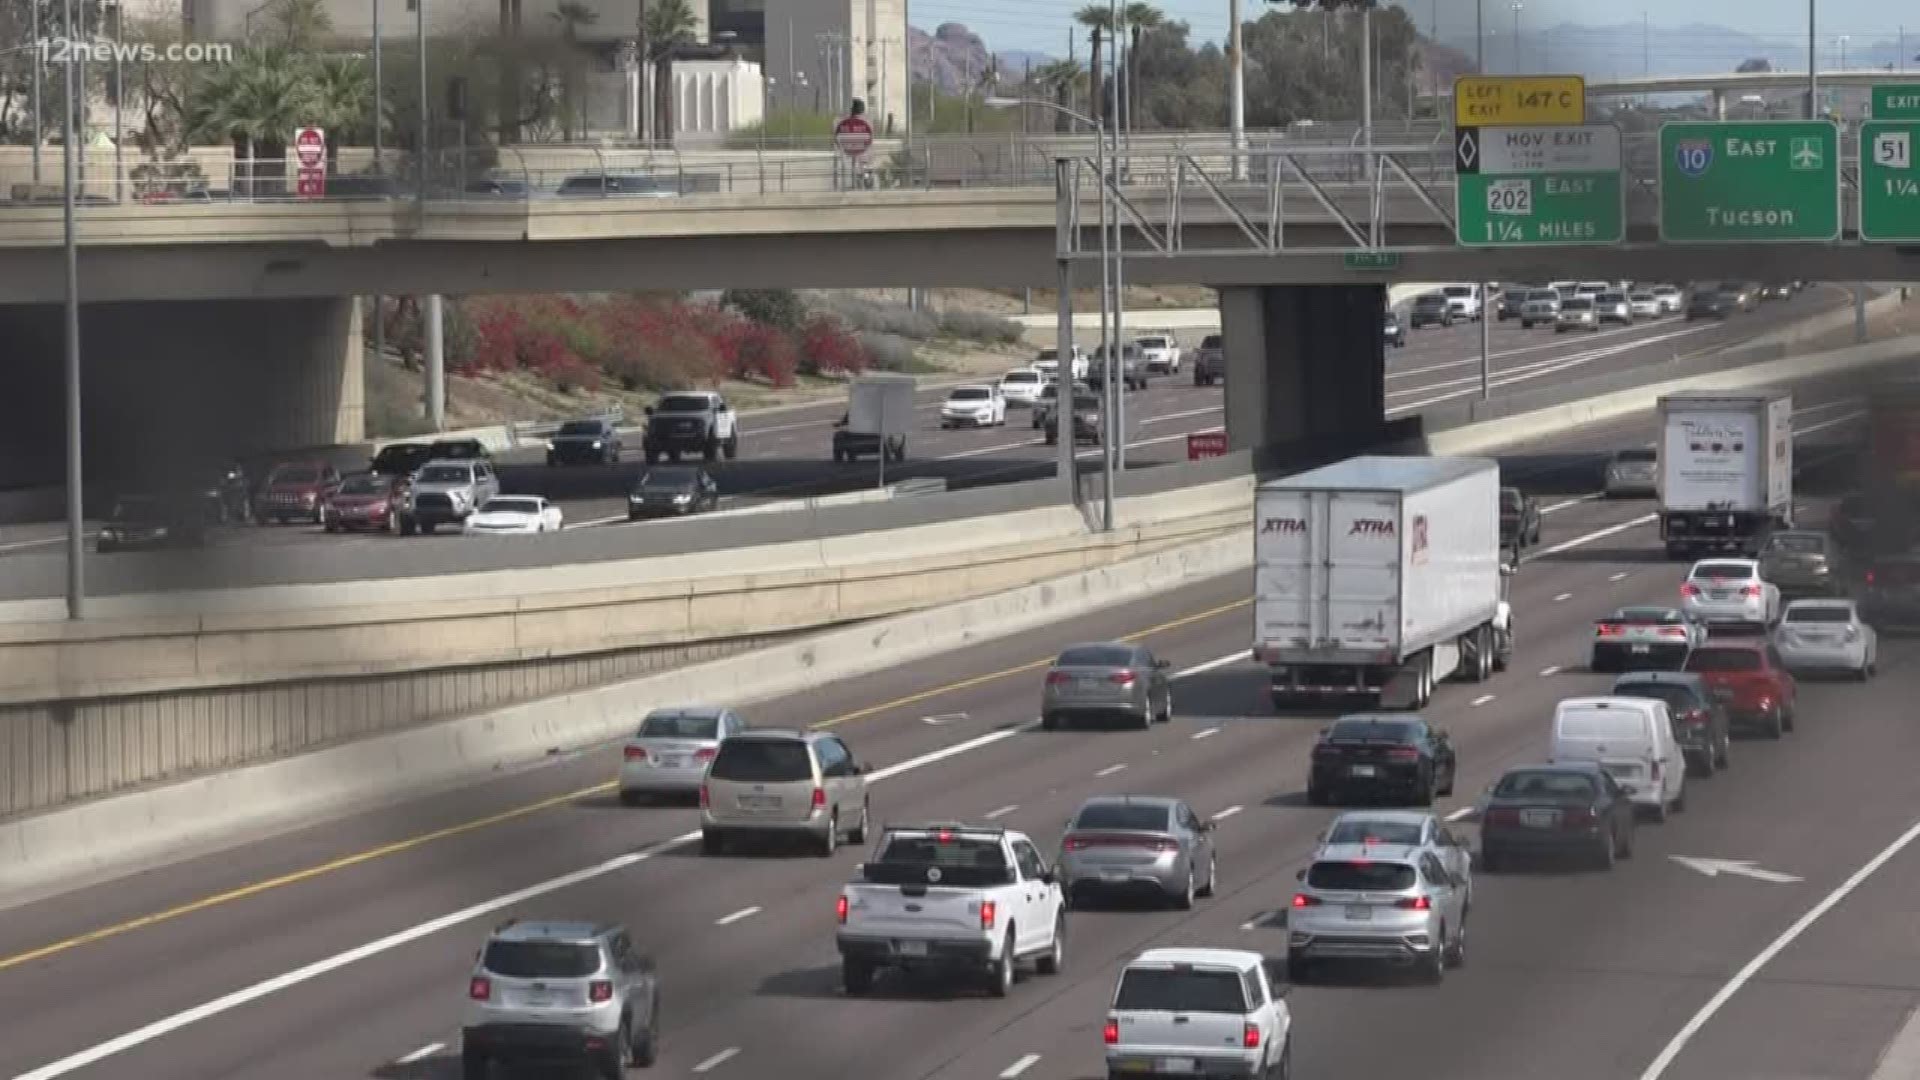 Police catch hundreds of thousands of drivers speeding each year in Arizona. The proposal has divided people over fears about safety.